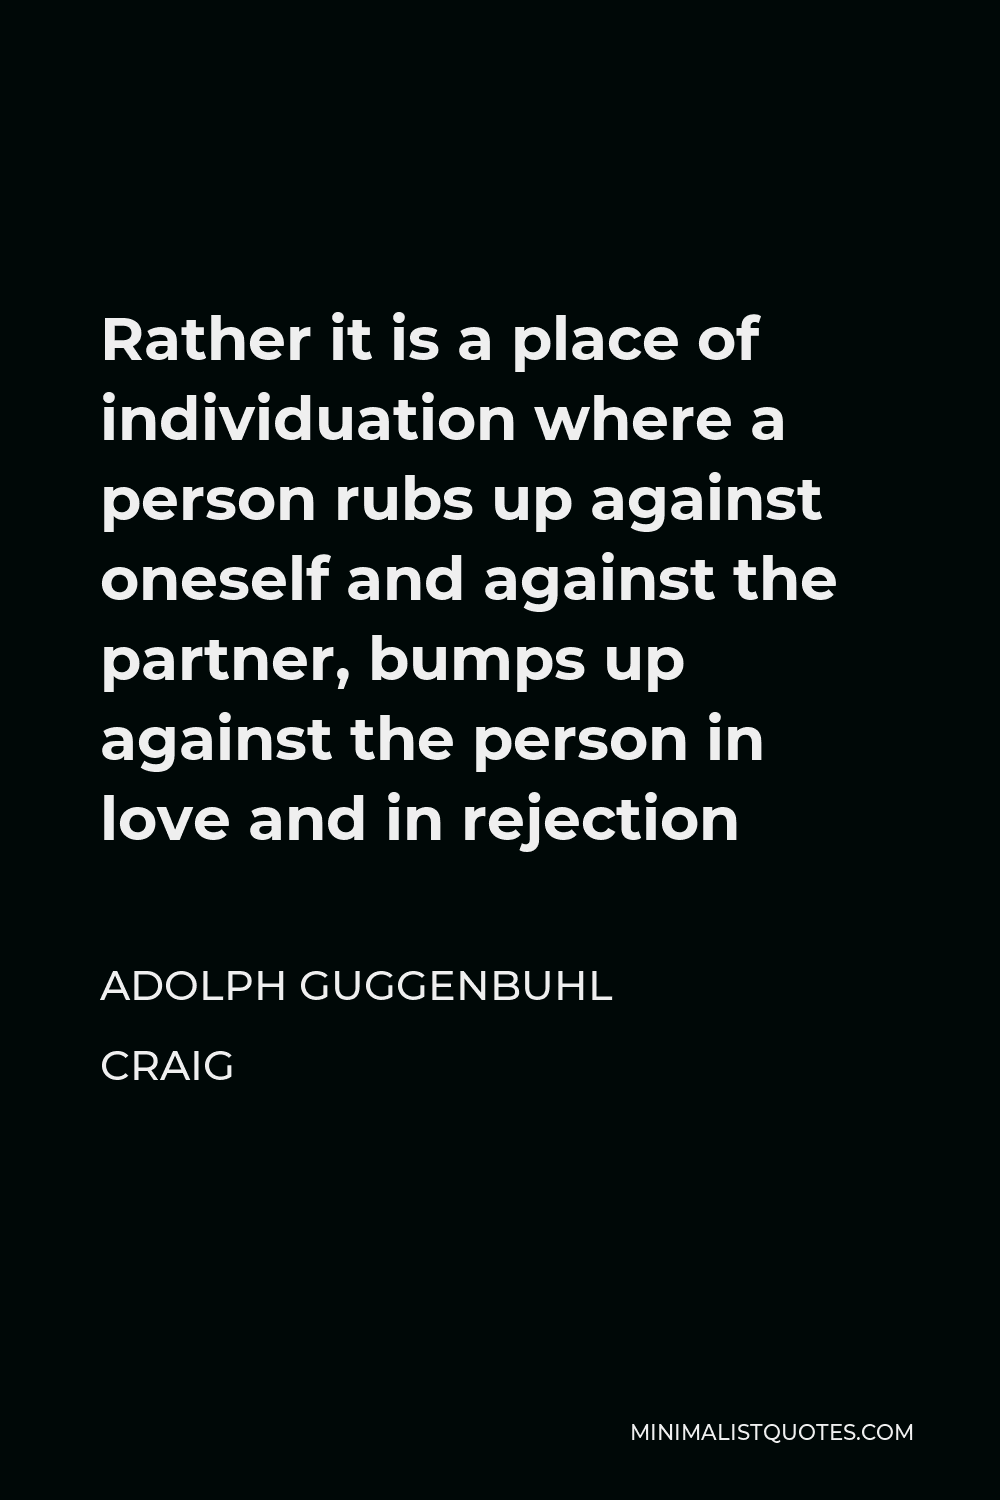 Adolph Guggenbuhl Craig Quote - Rather it is a place of individuation where a person rubs up against oneself and against the partner, bumps up against the person in love and in rejection